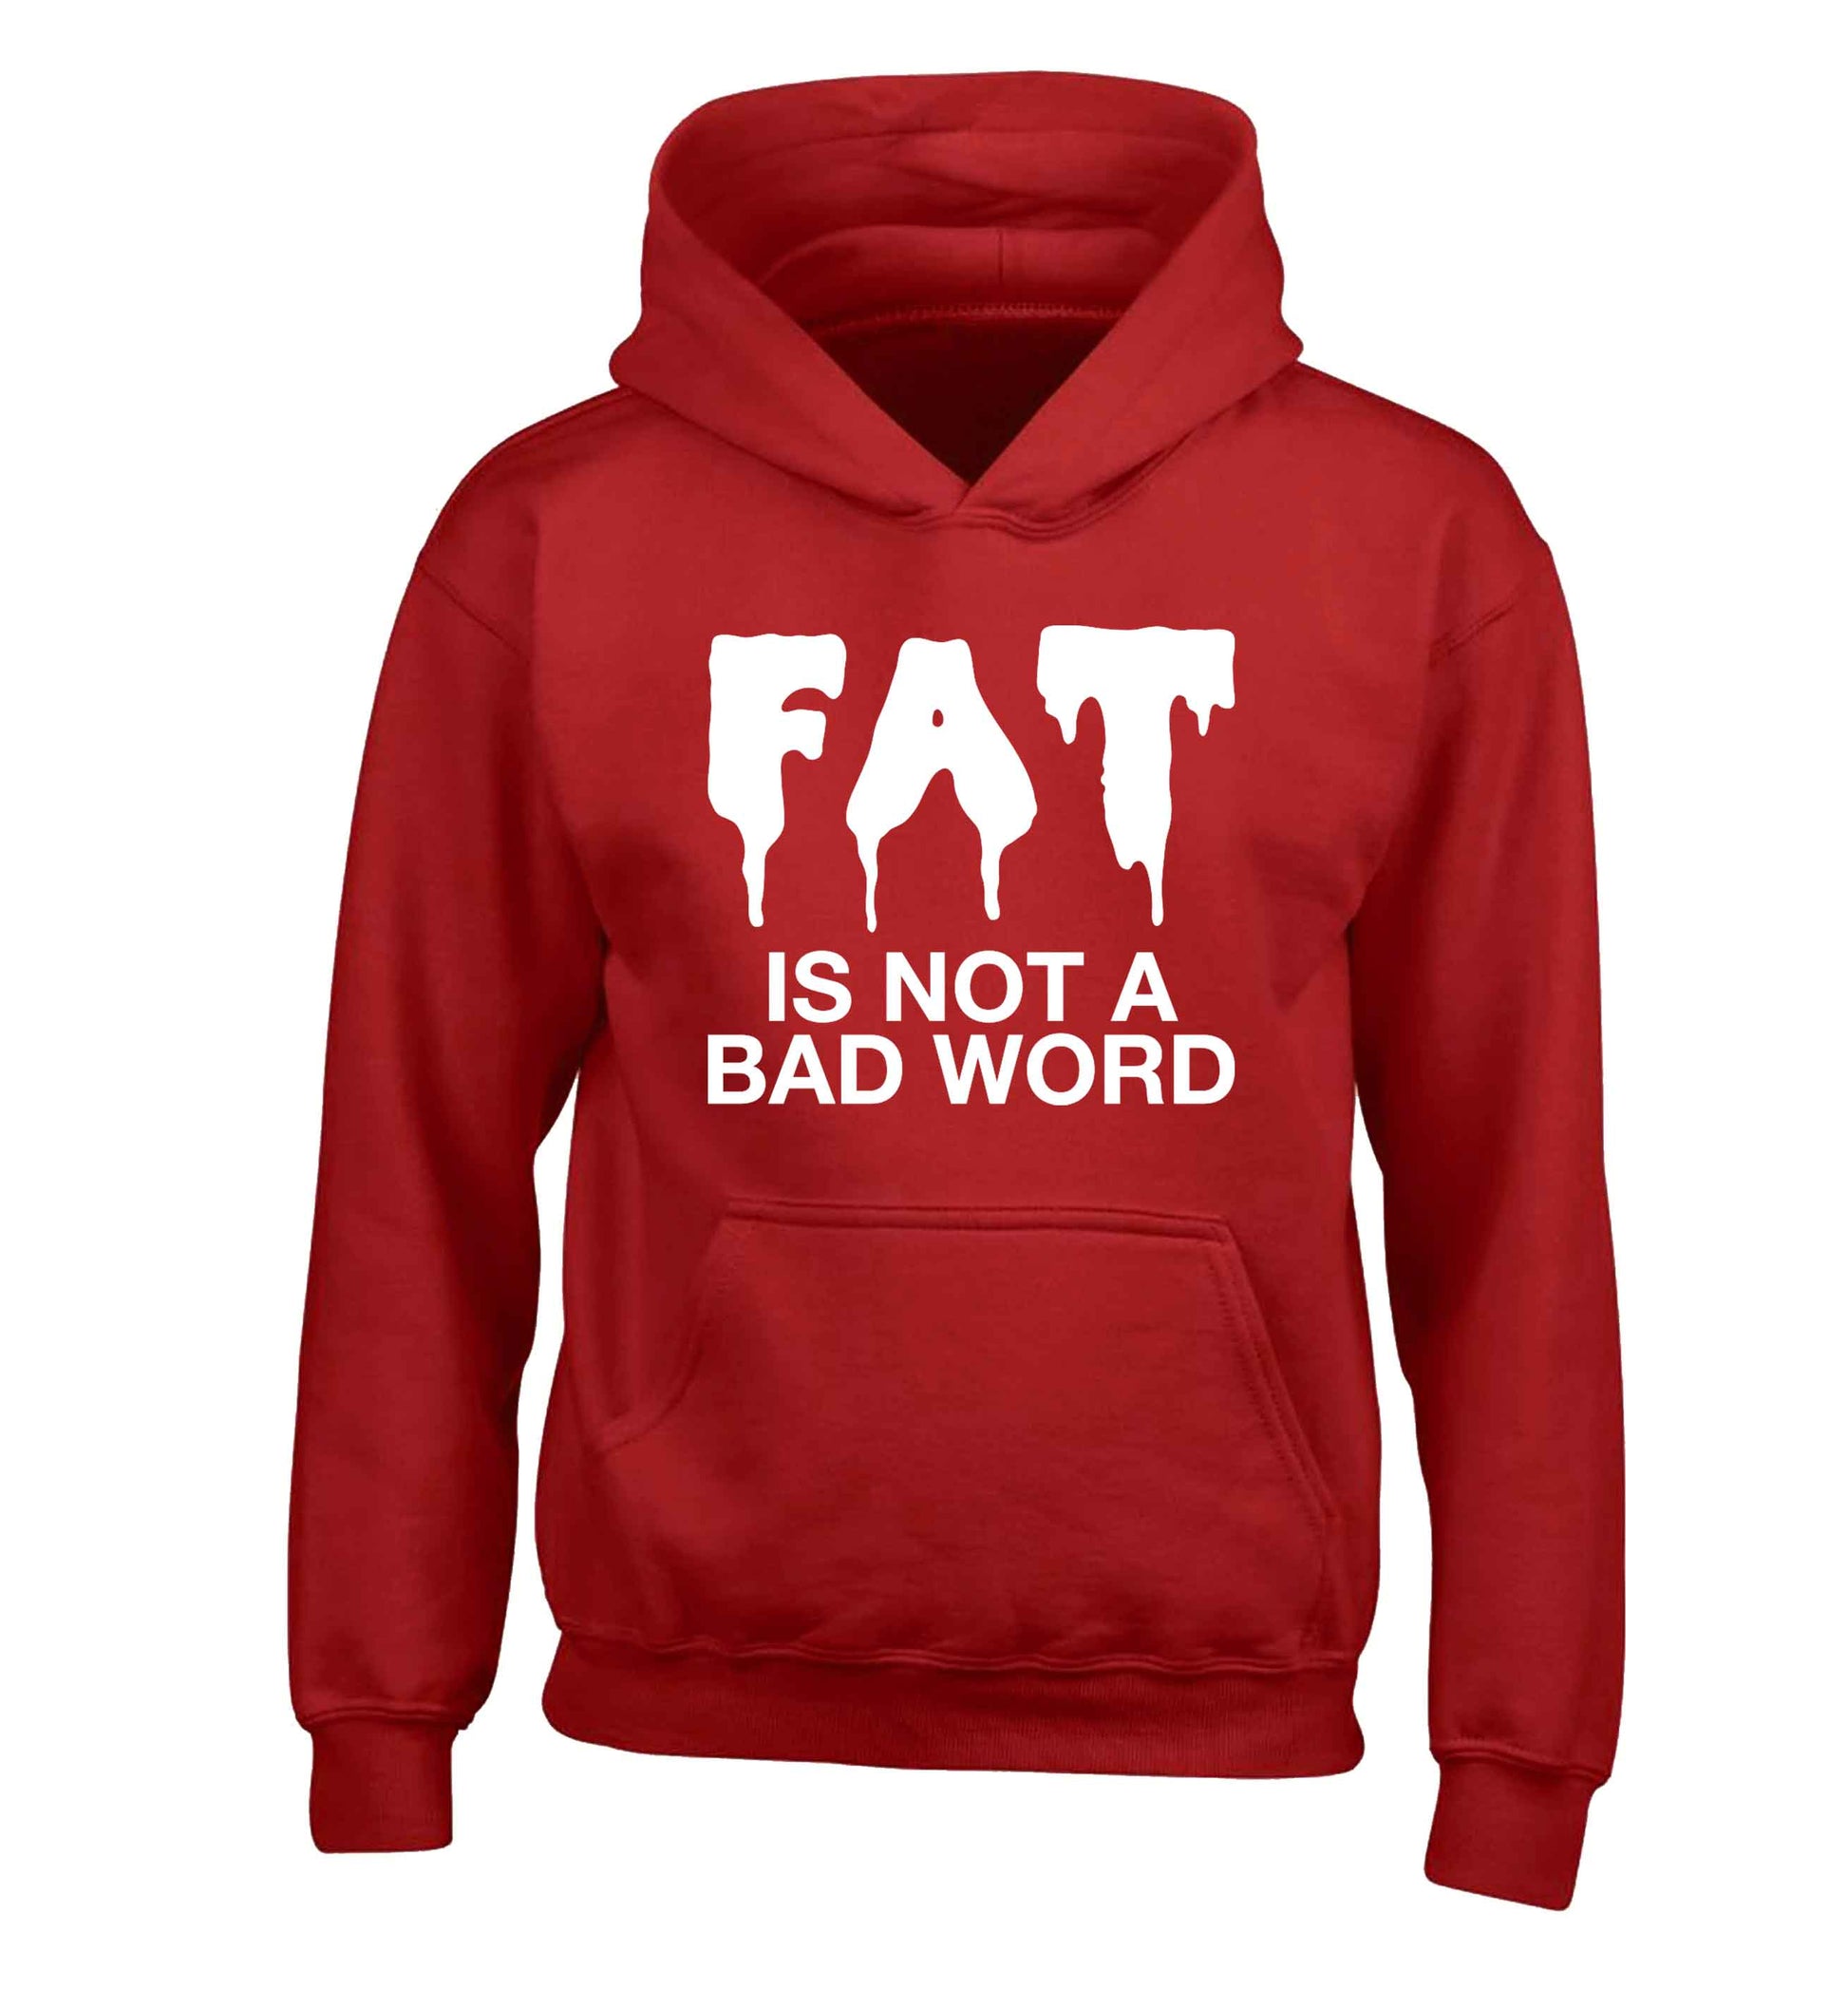 Fat is not a bad word children's red hoodie 12-13 Years